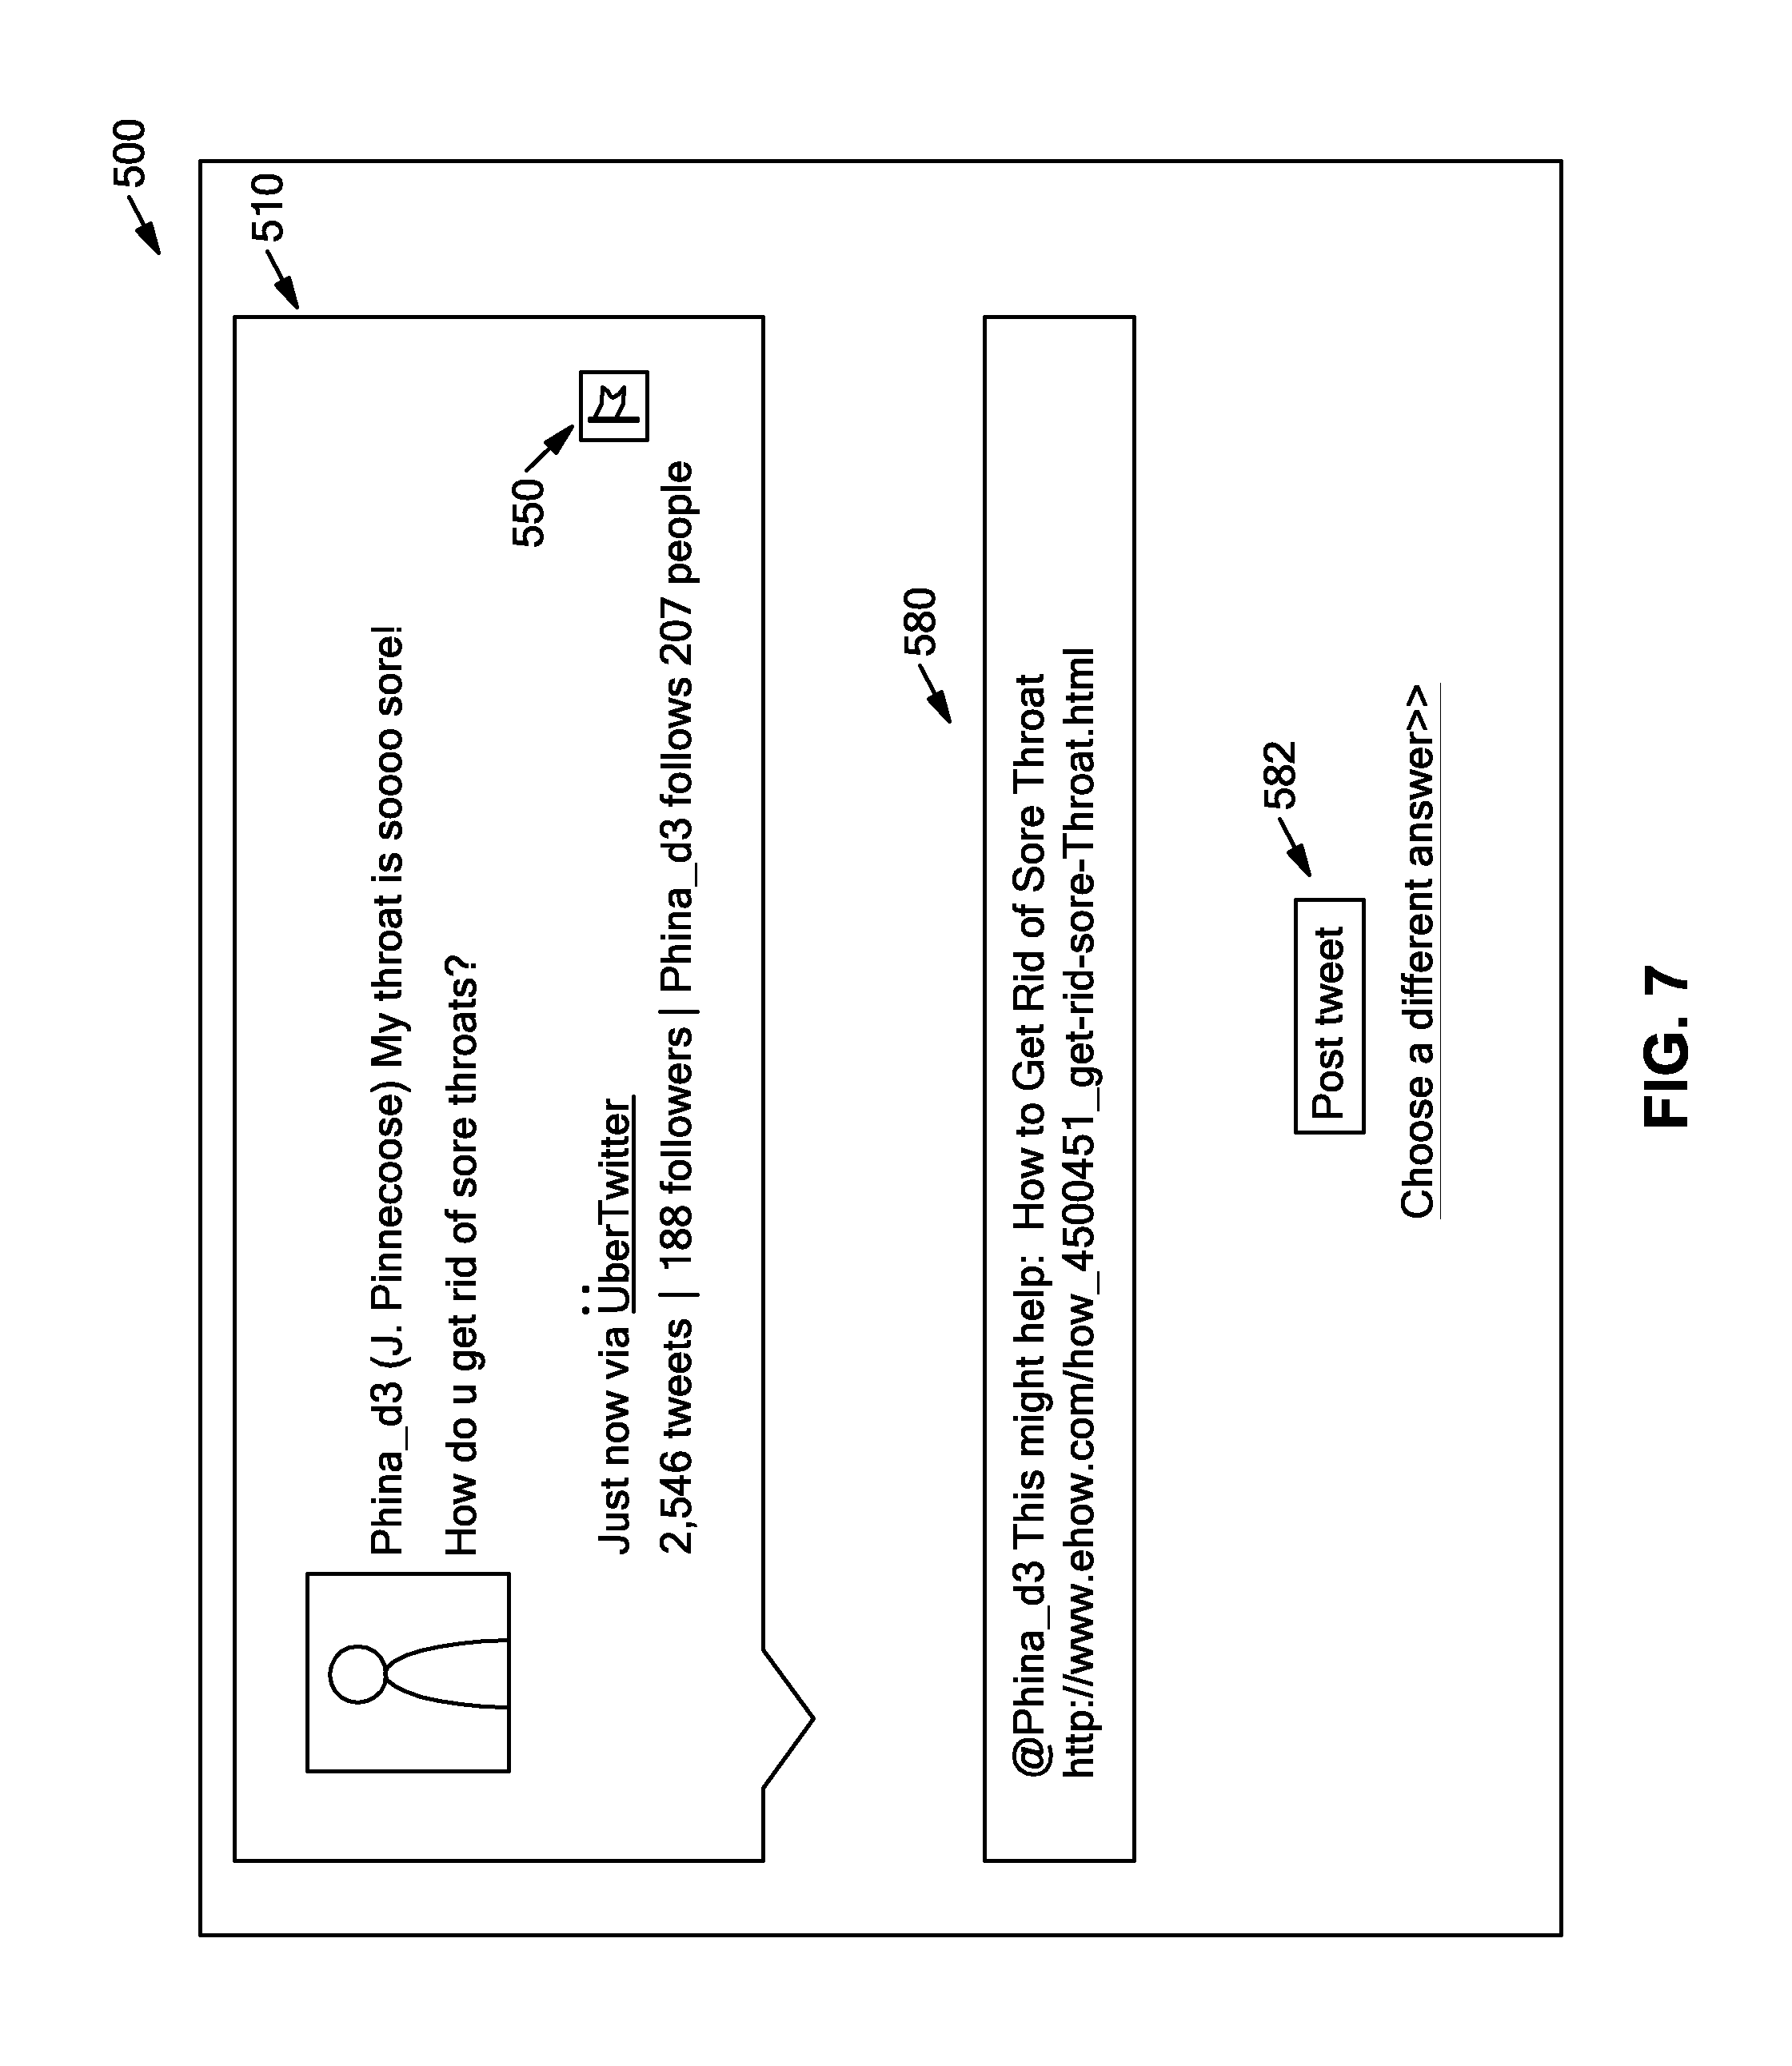 System and method for automated responses to information needs on